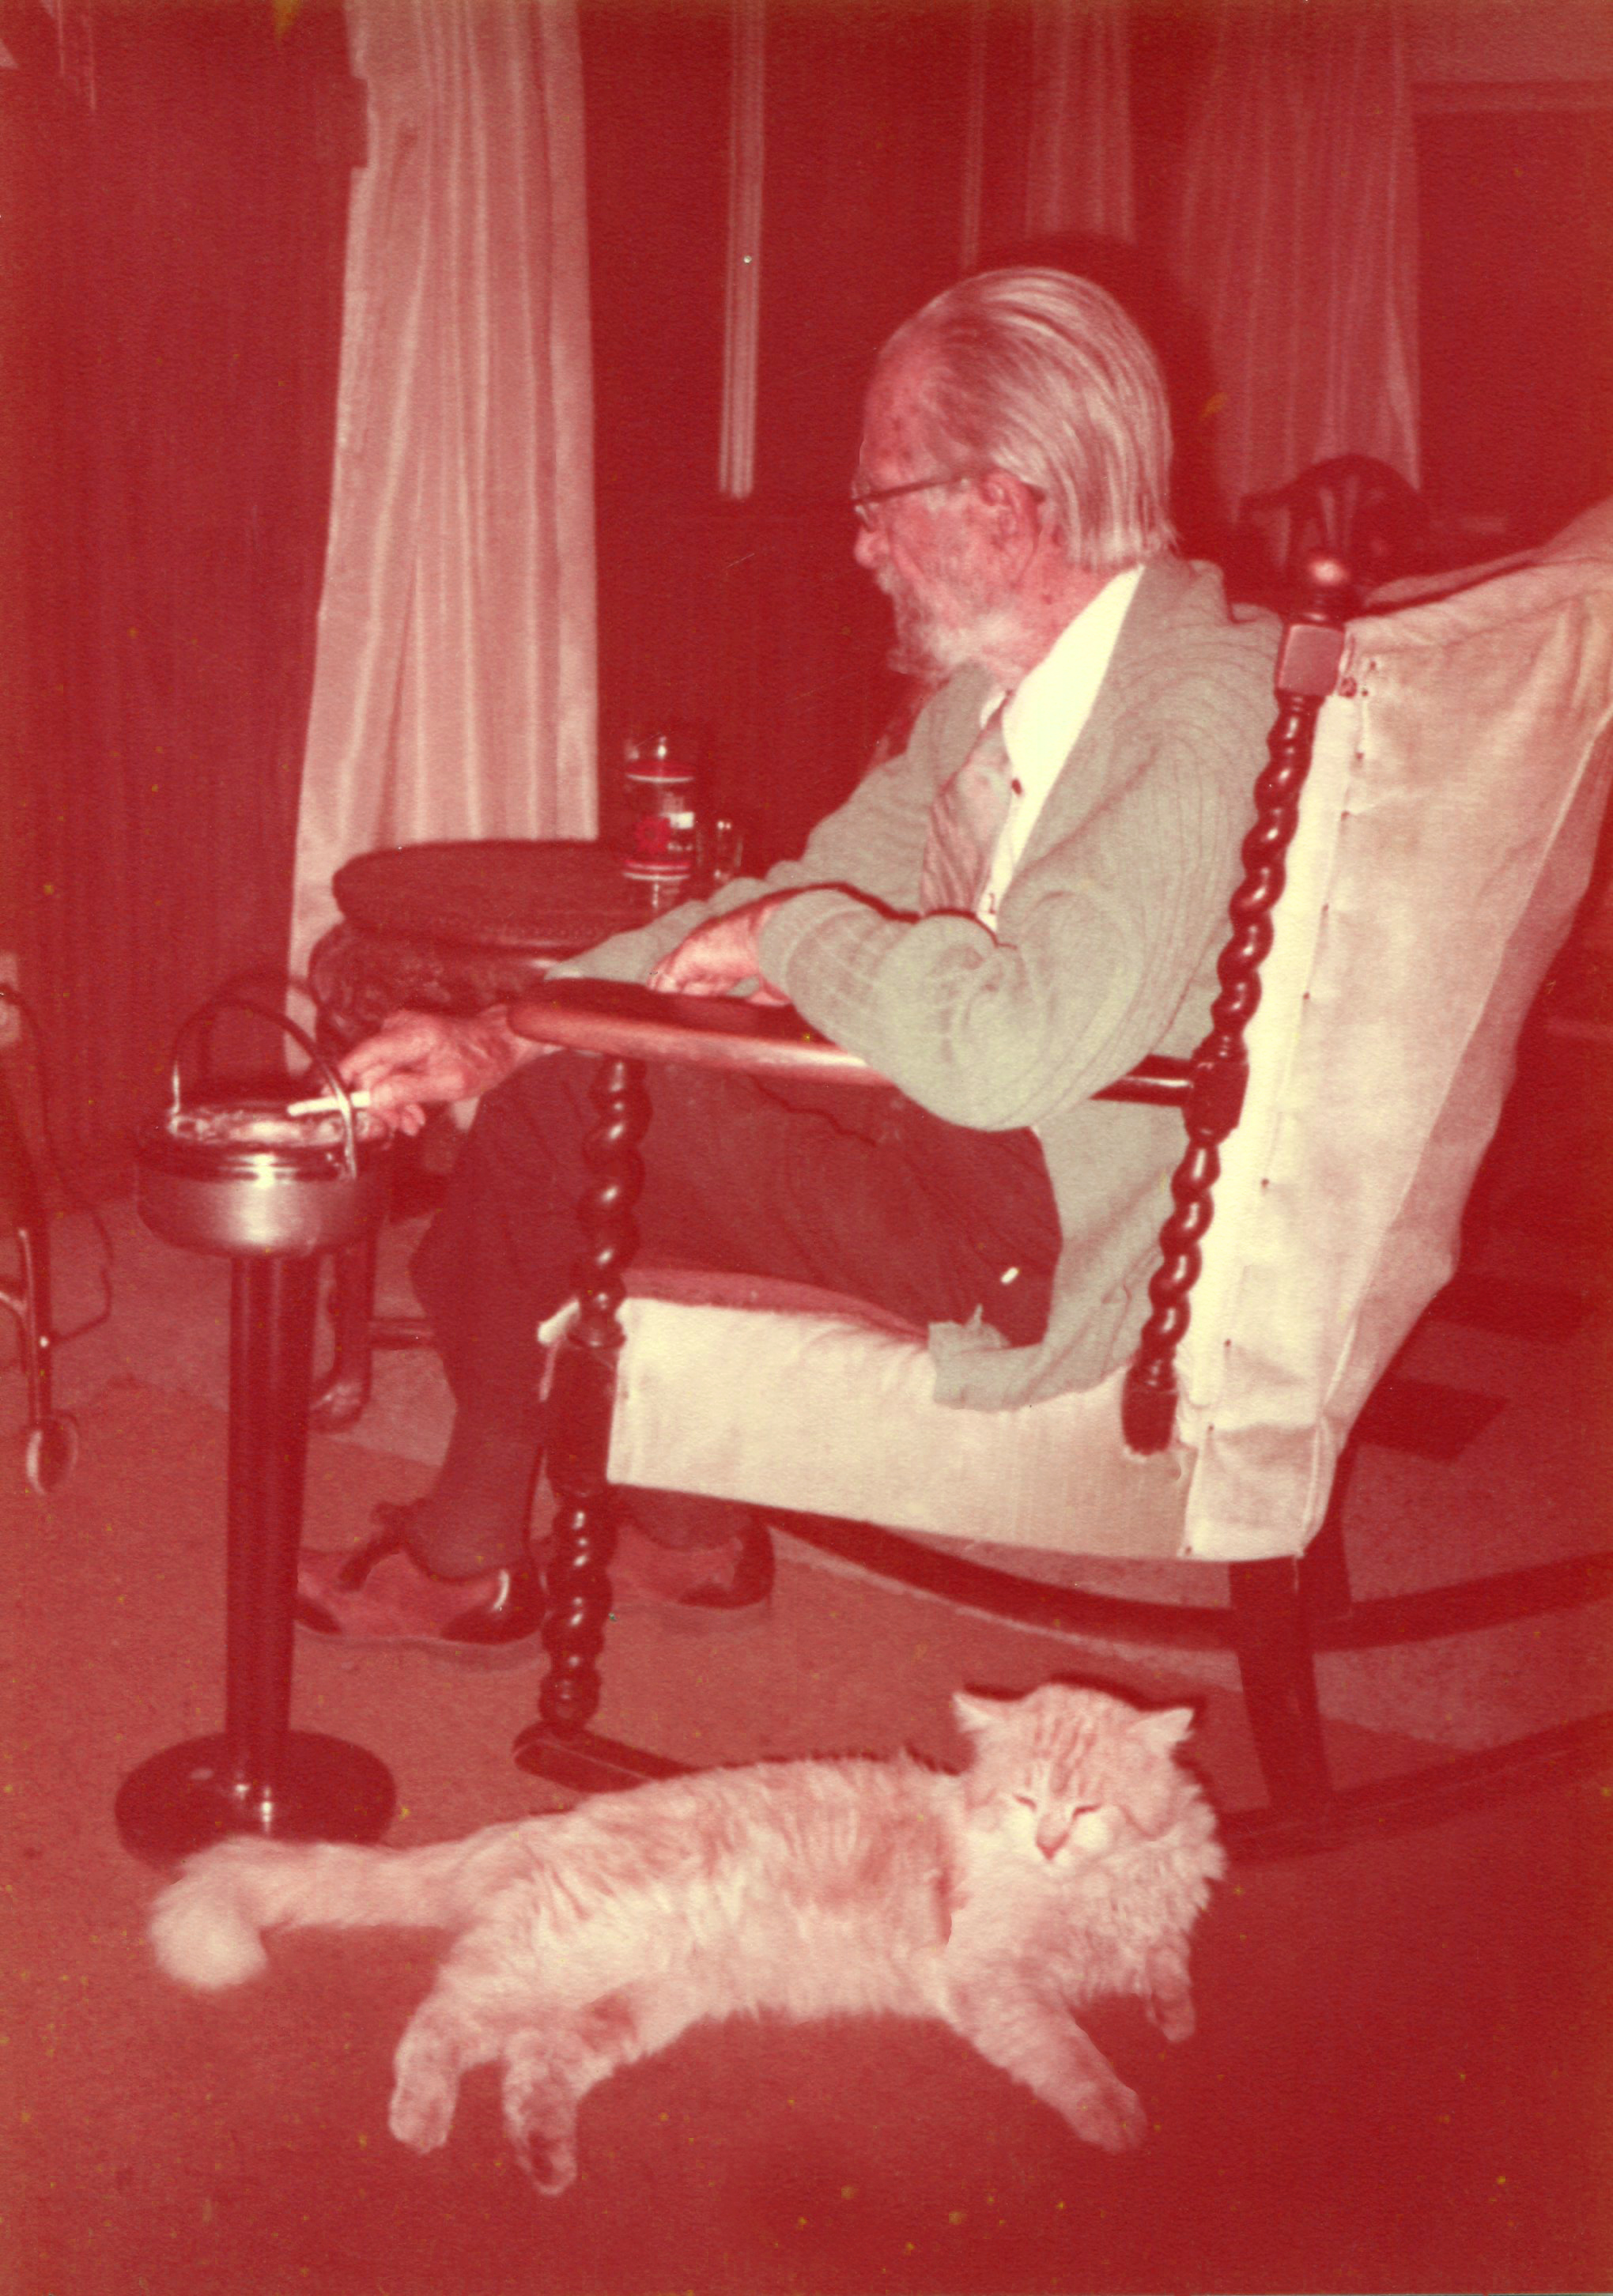 1983 Watching television with Russell